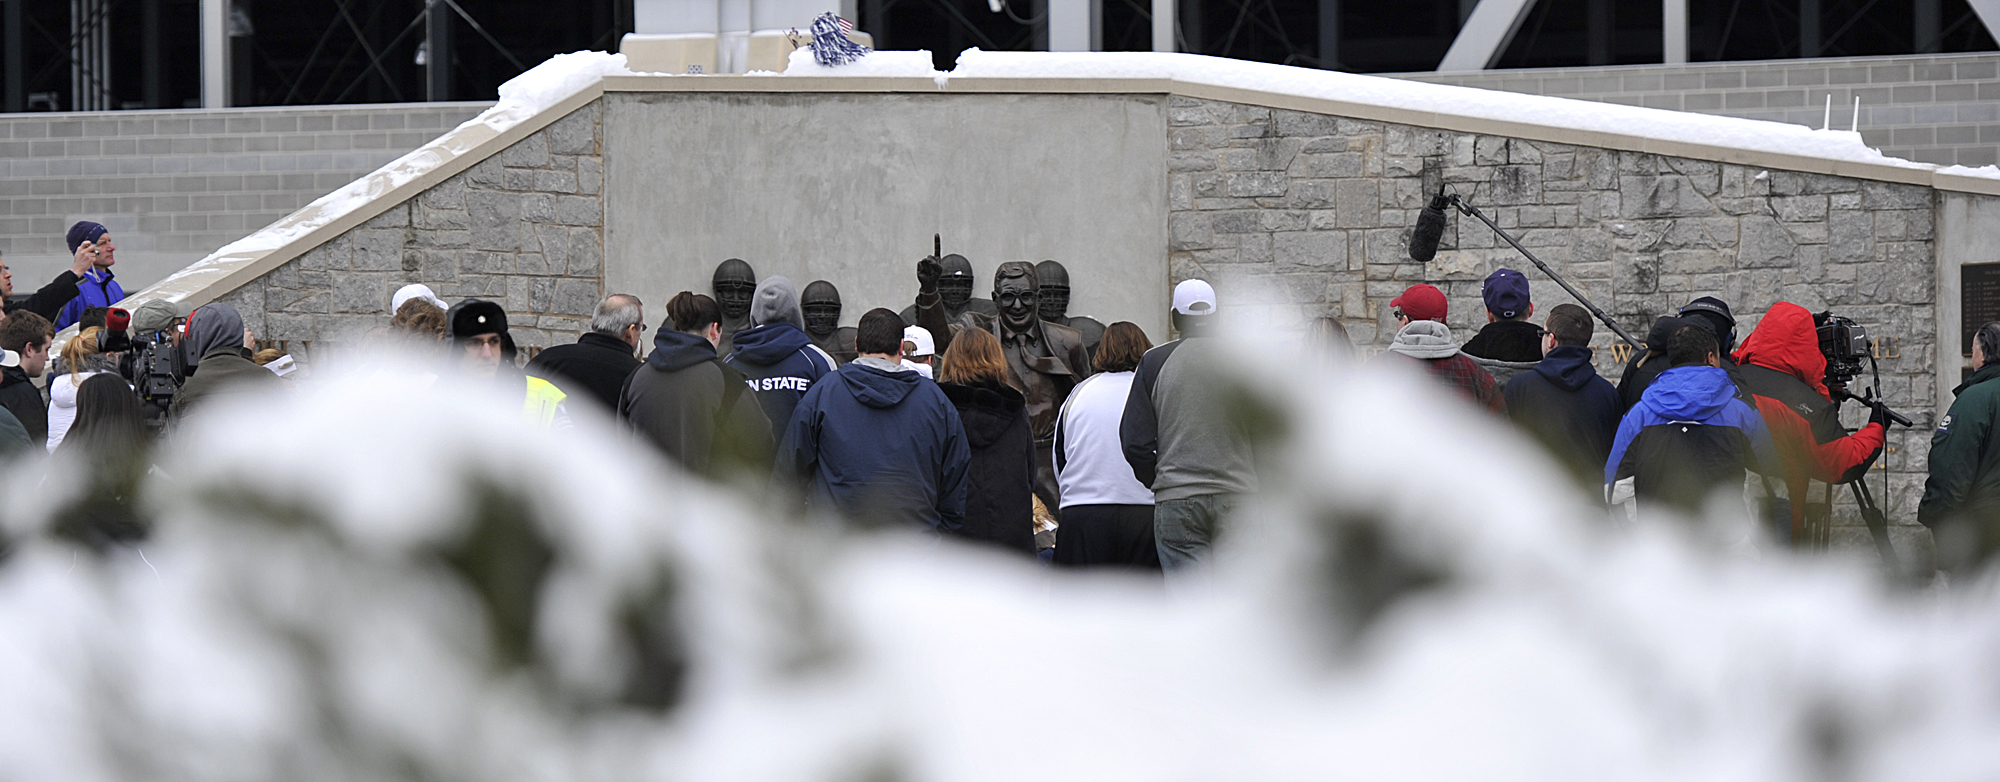  Crowds gather around the Joe Paterno Statue on Sunday, Jan. 22, 2012 after learning of his death due to complications with lung cancer. 